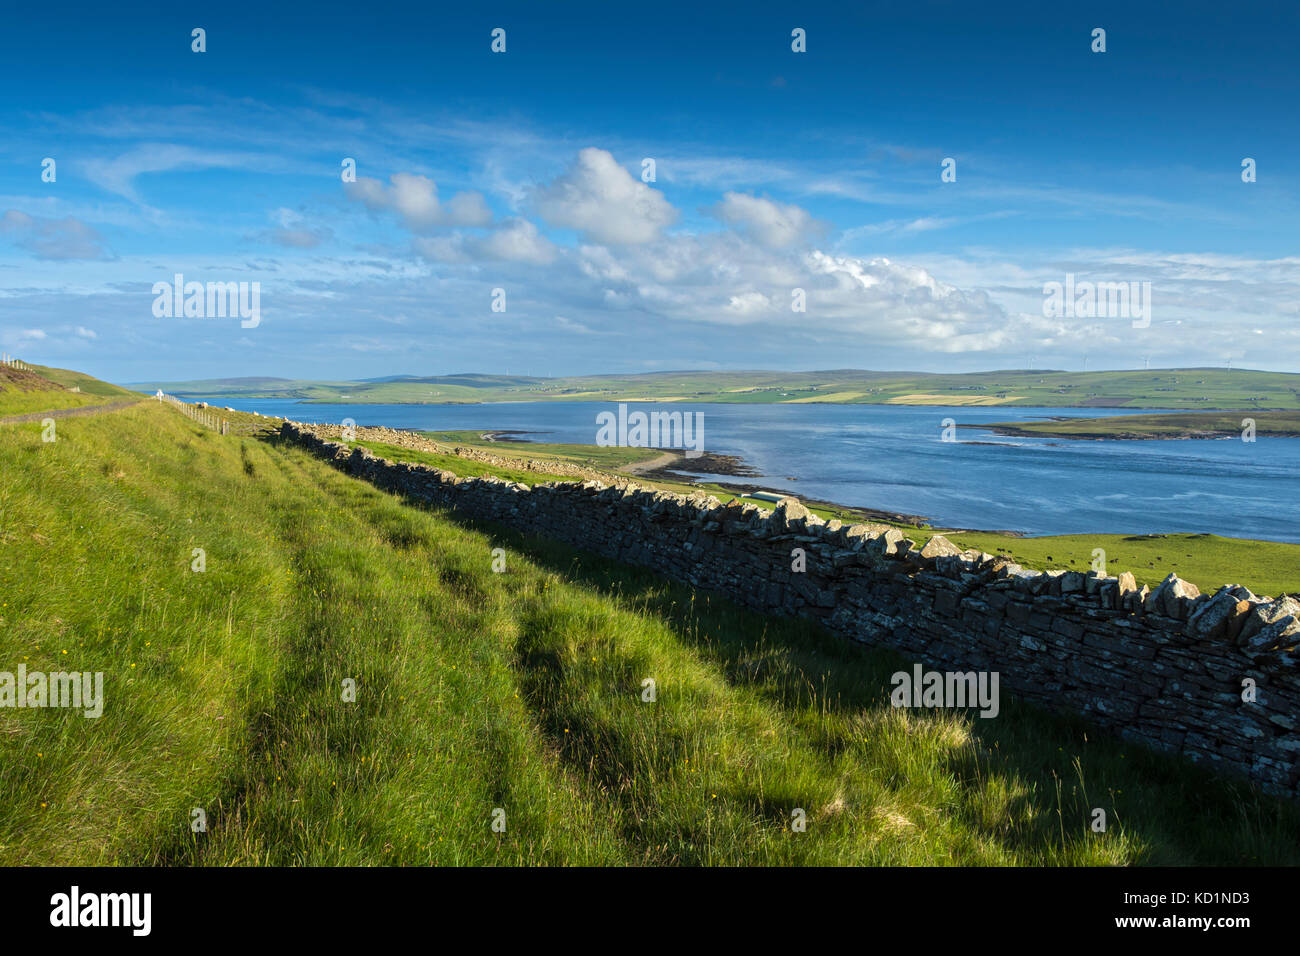 Orkney Mainland over Eynhallow Sound, from the island of Rousay, Orkney Islands, Scotland, UK. Stock Photo